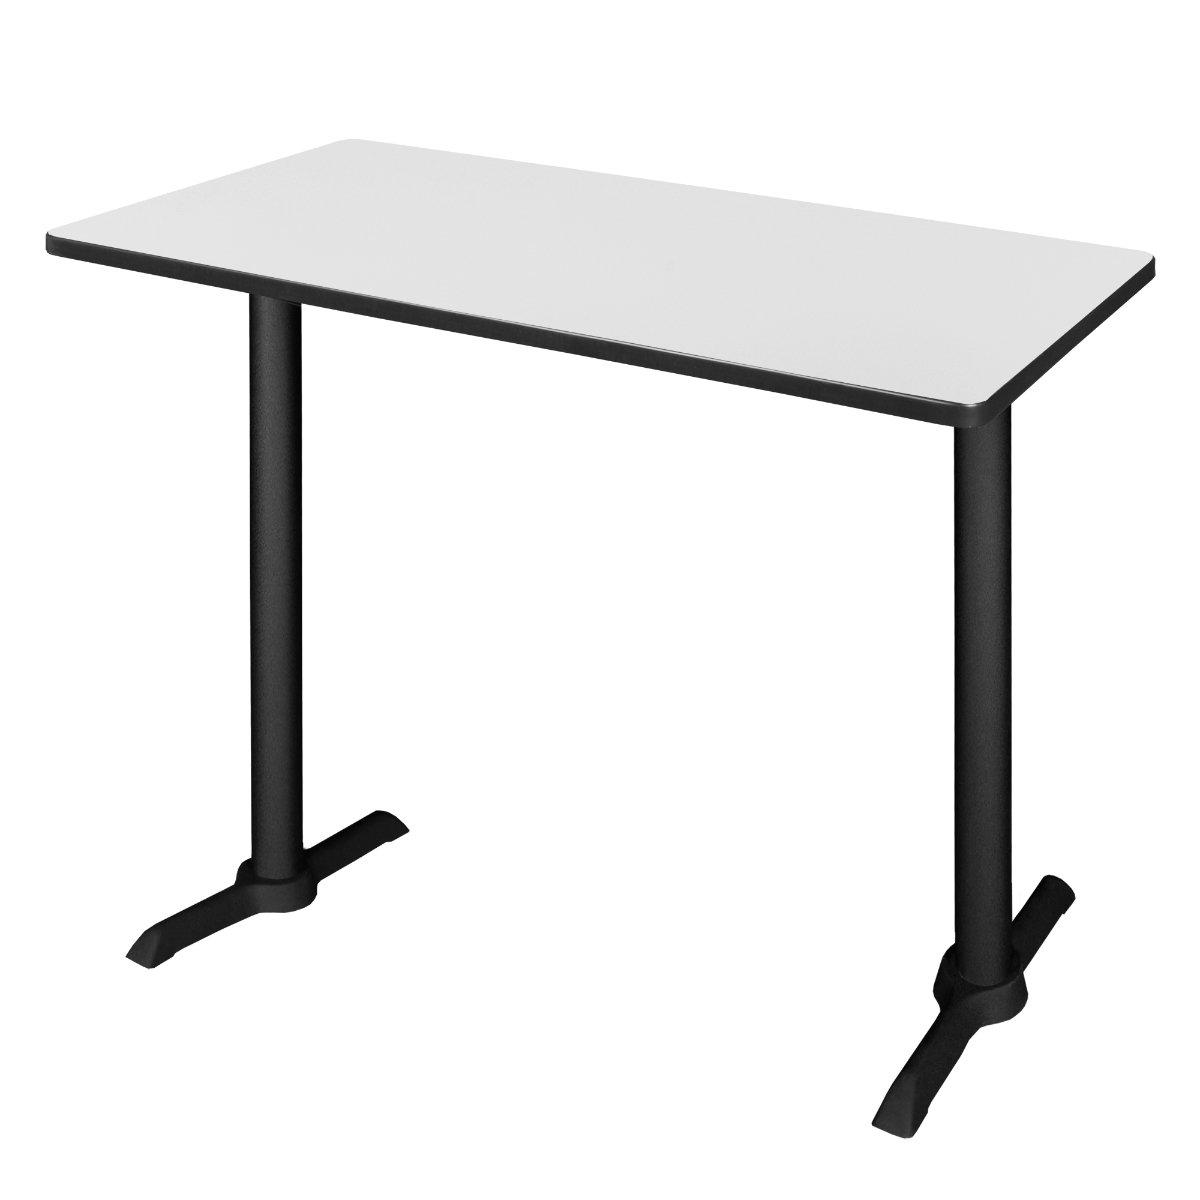 Cain 48" x 24" Cafe Height Training Table